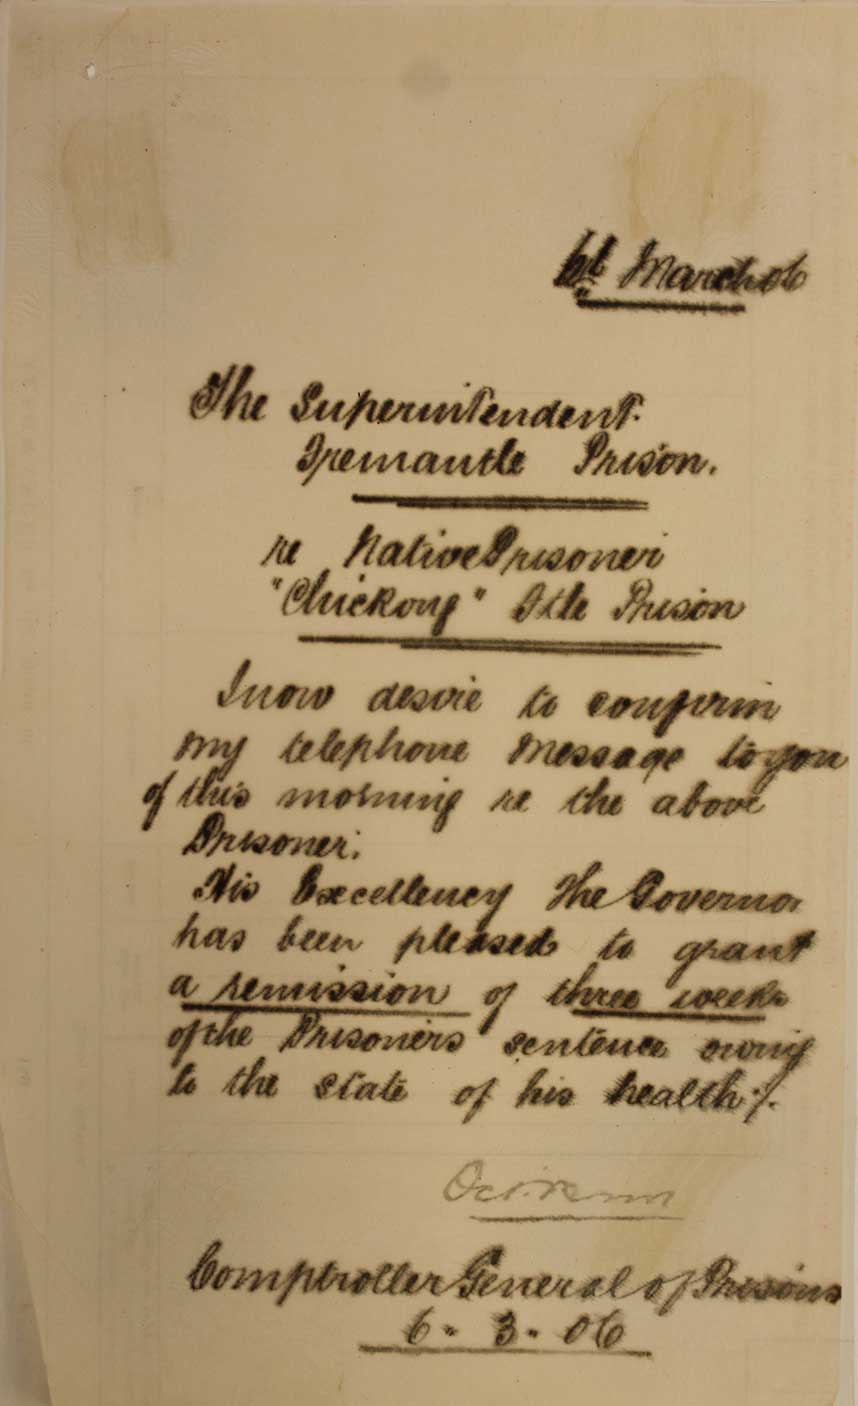 Gaols Department correspondence showing Chickong's Remission of sentence, 1905